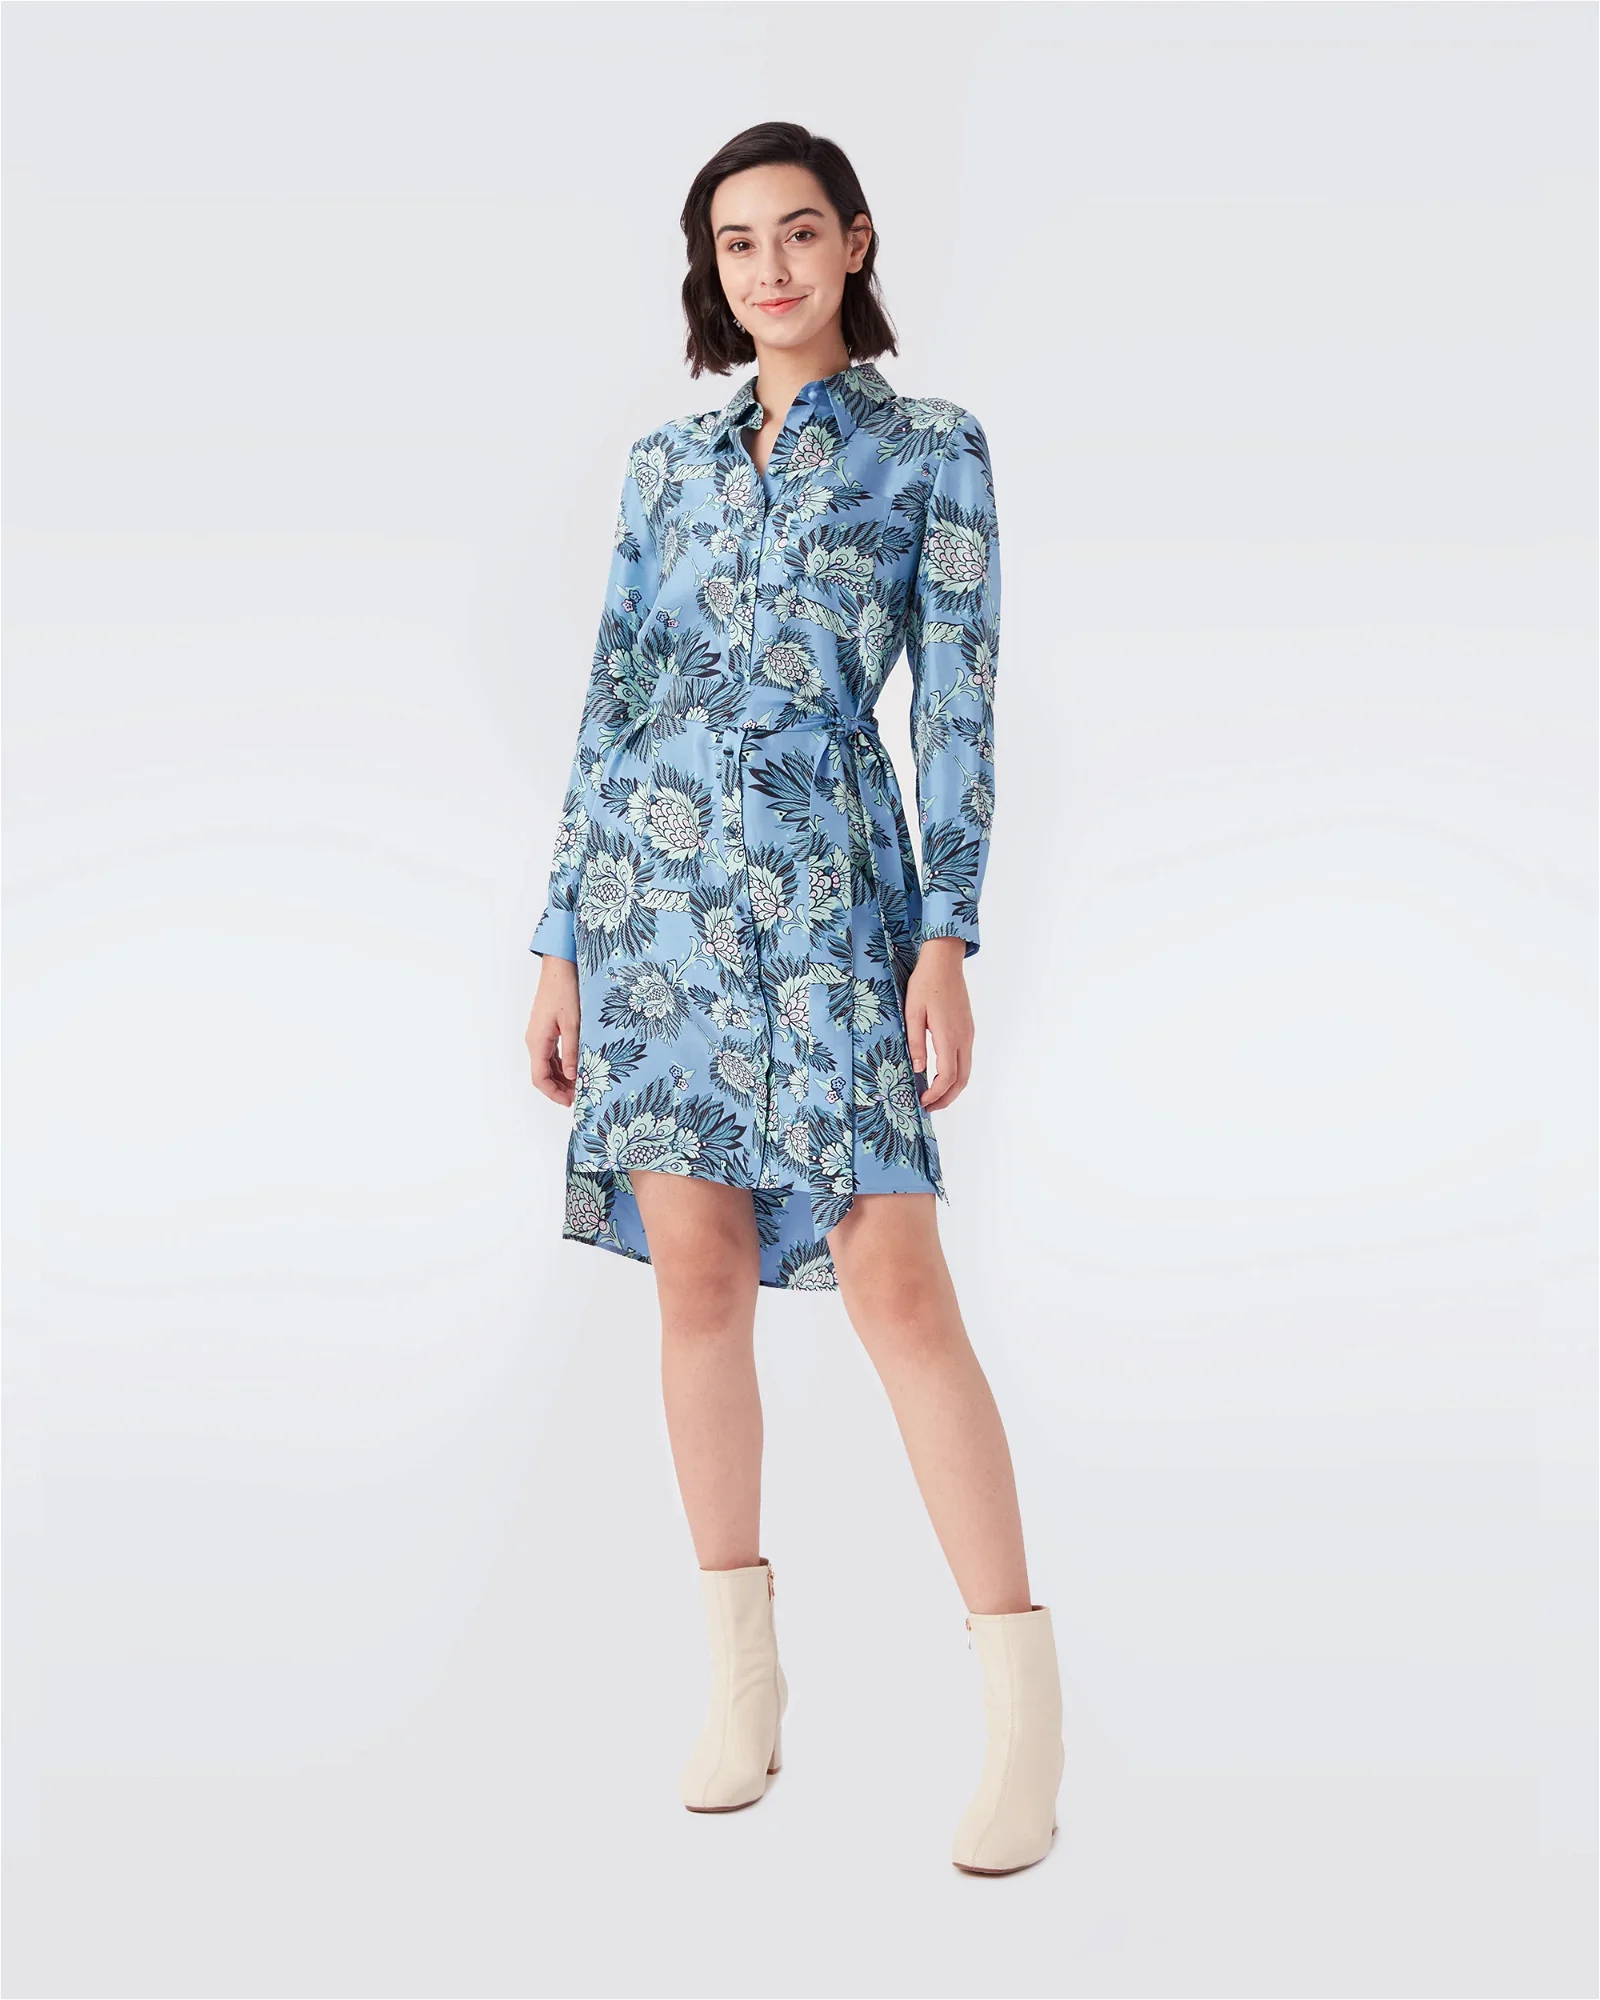 Image of Prita Silk Twill Shirt Dress in Feather Floral